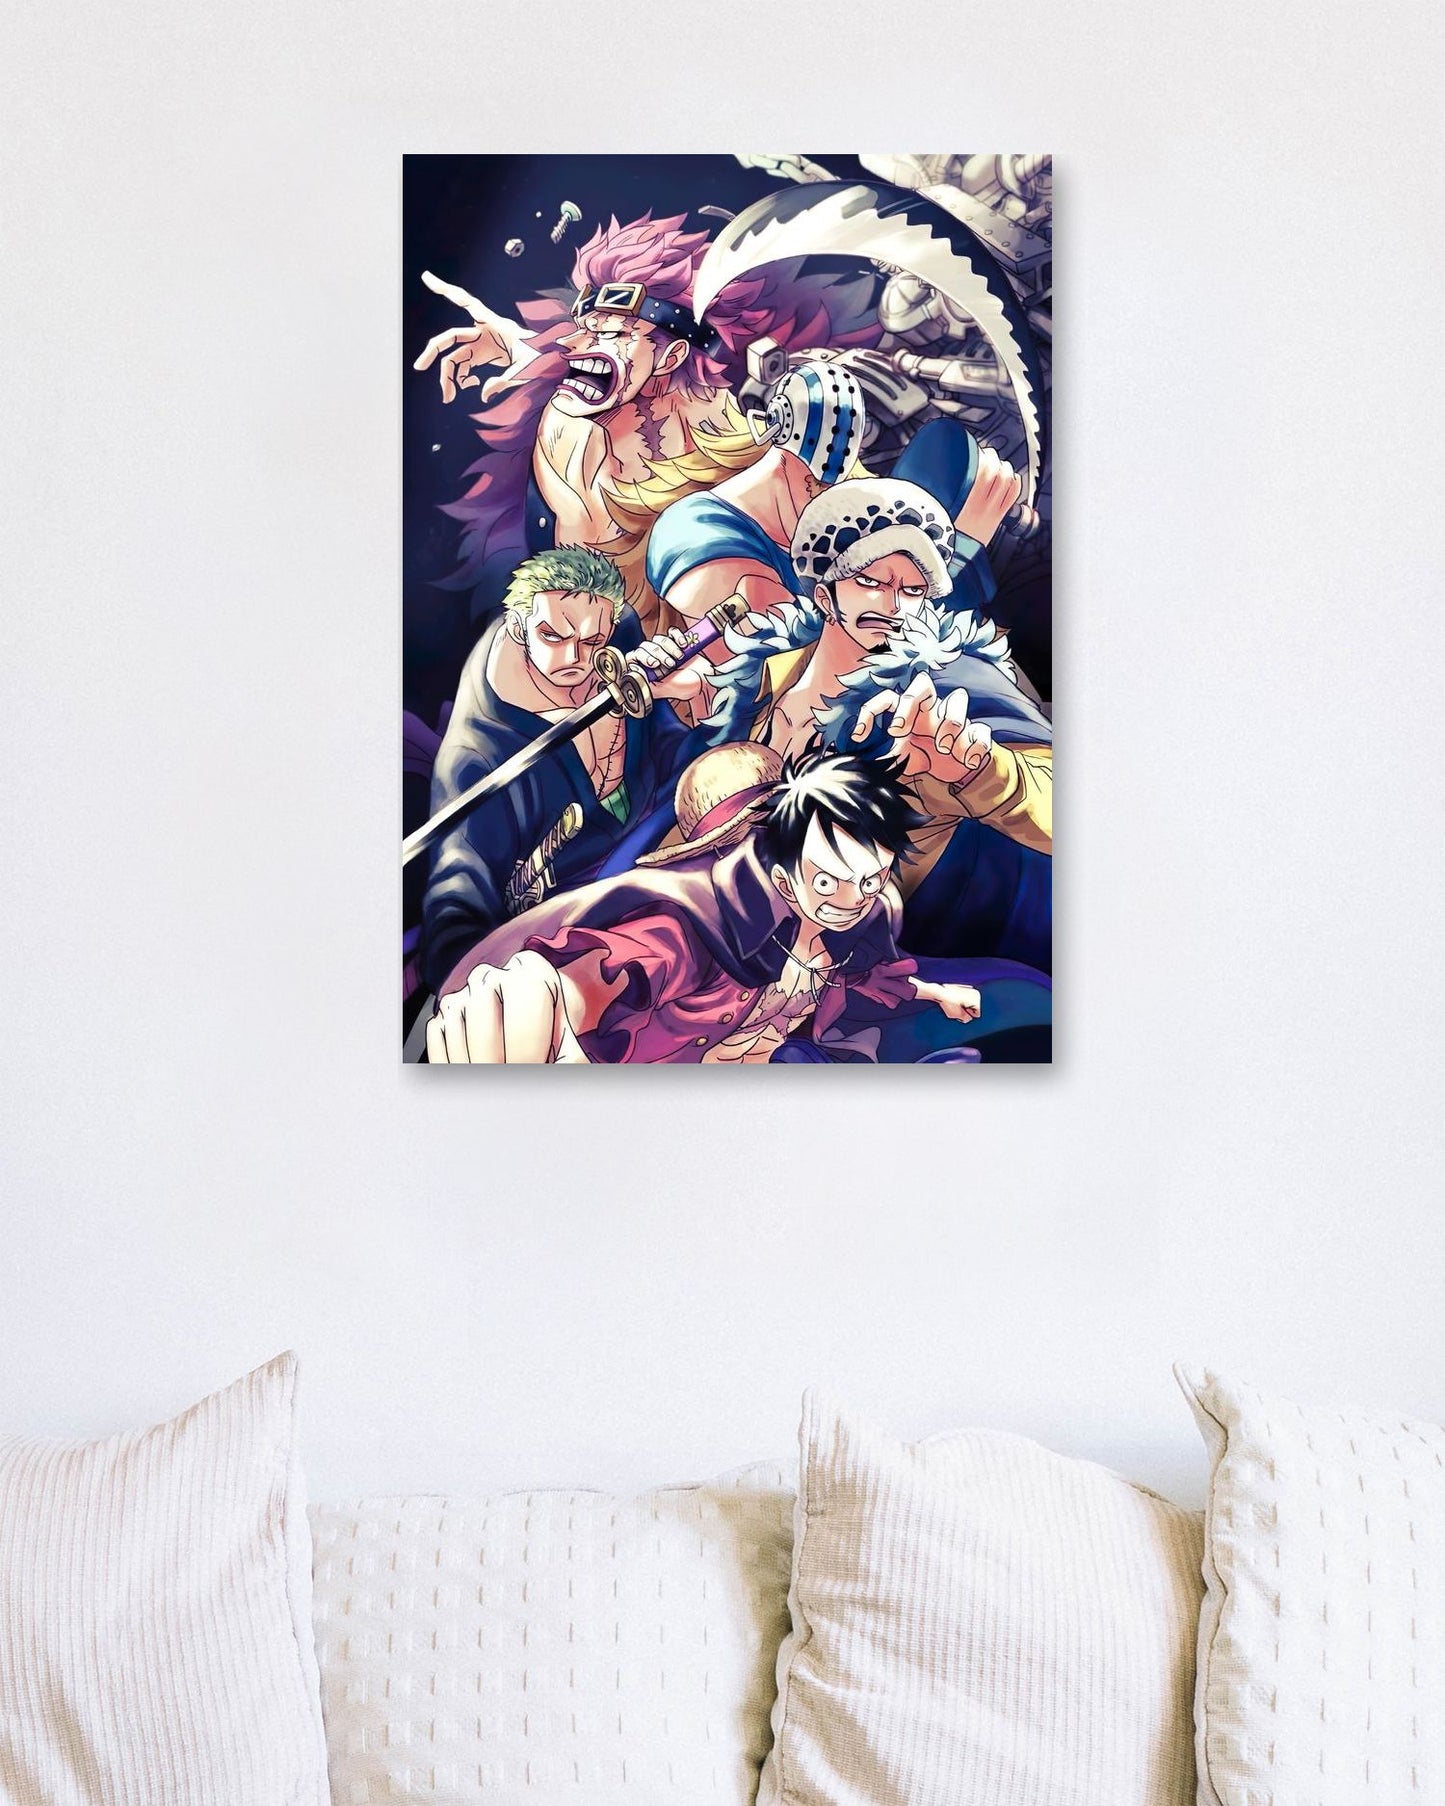 One piece 1 - @styleartwork99